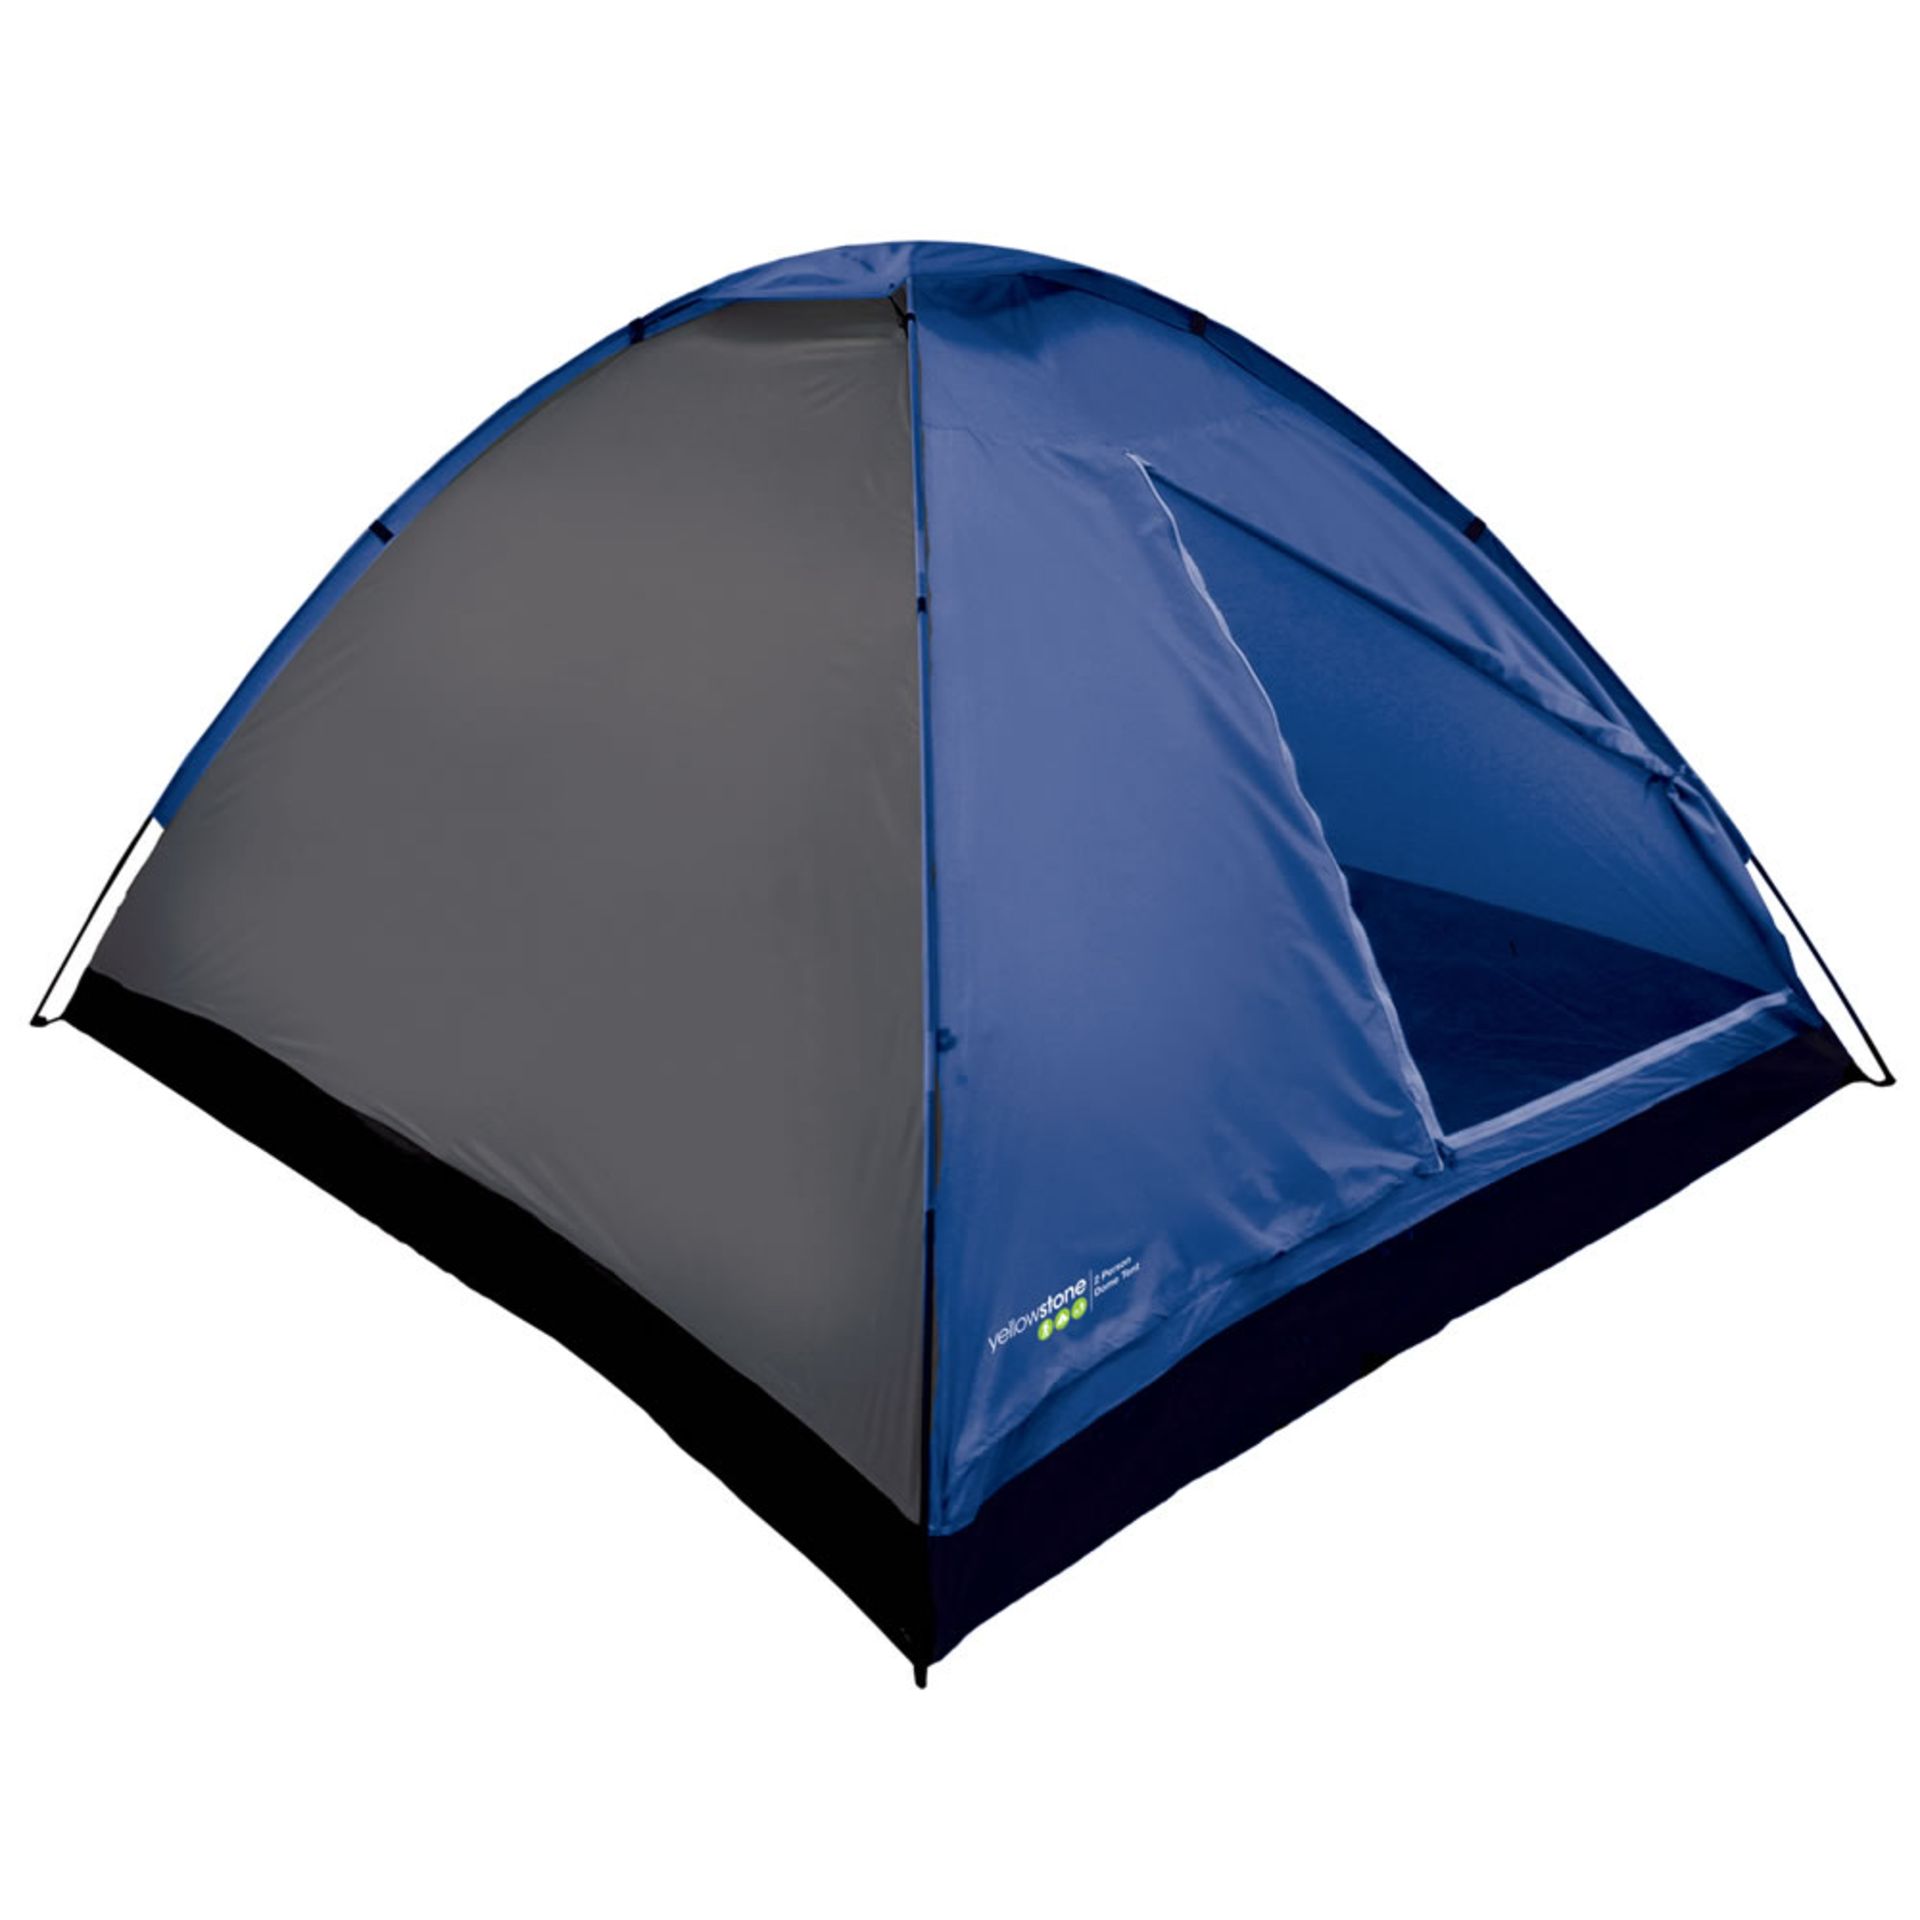 V Two Person Dome Tent X  2  Bid price to be multiplied by Two - Image 2 of 2